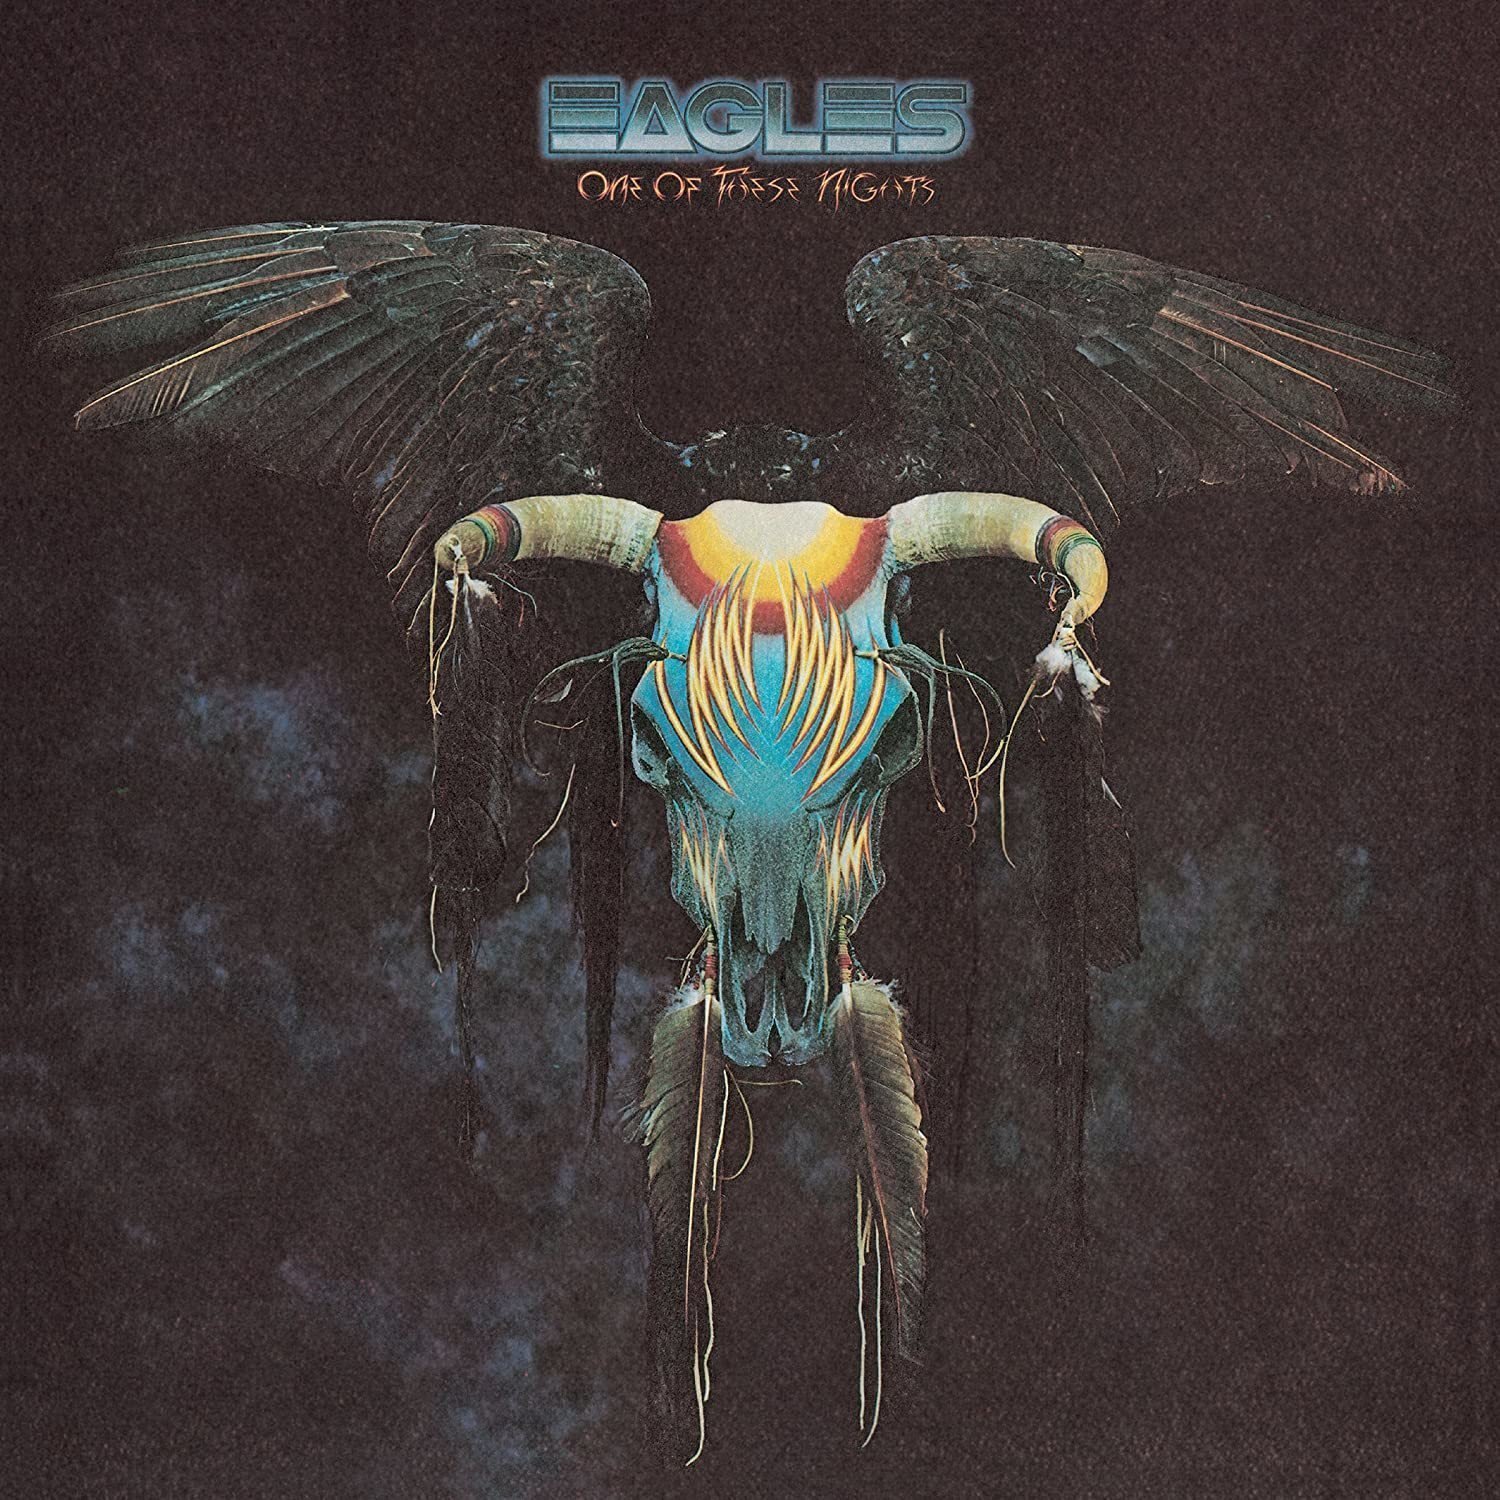 LP platňa Eagles - One Of These Nights (LP)